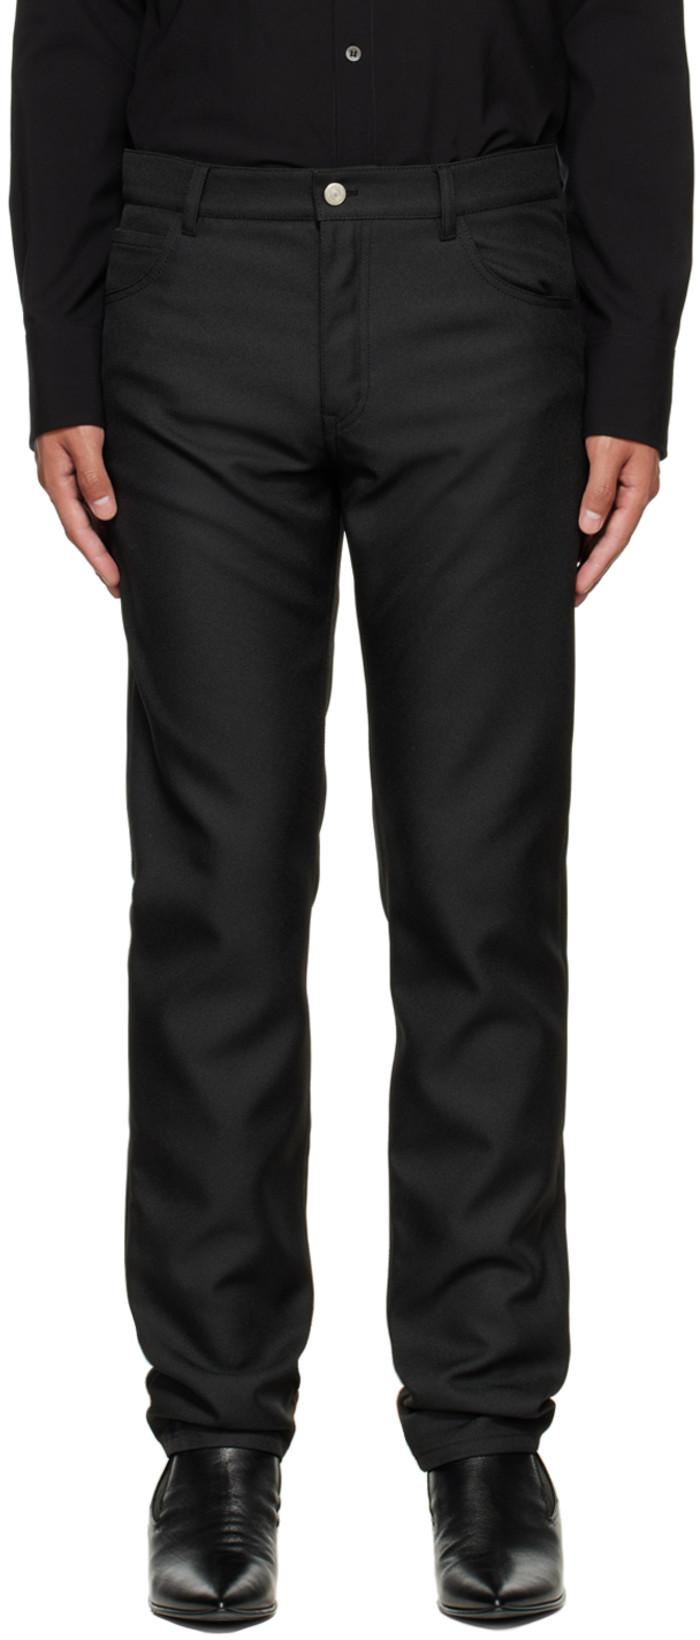 Black Polyester Trousers by COURREGES